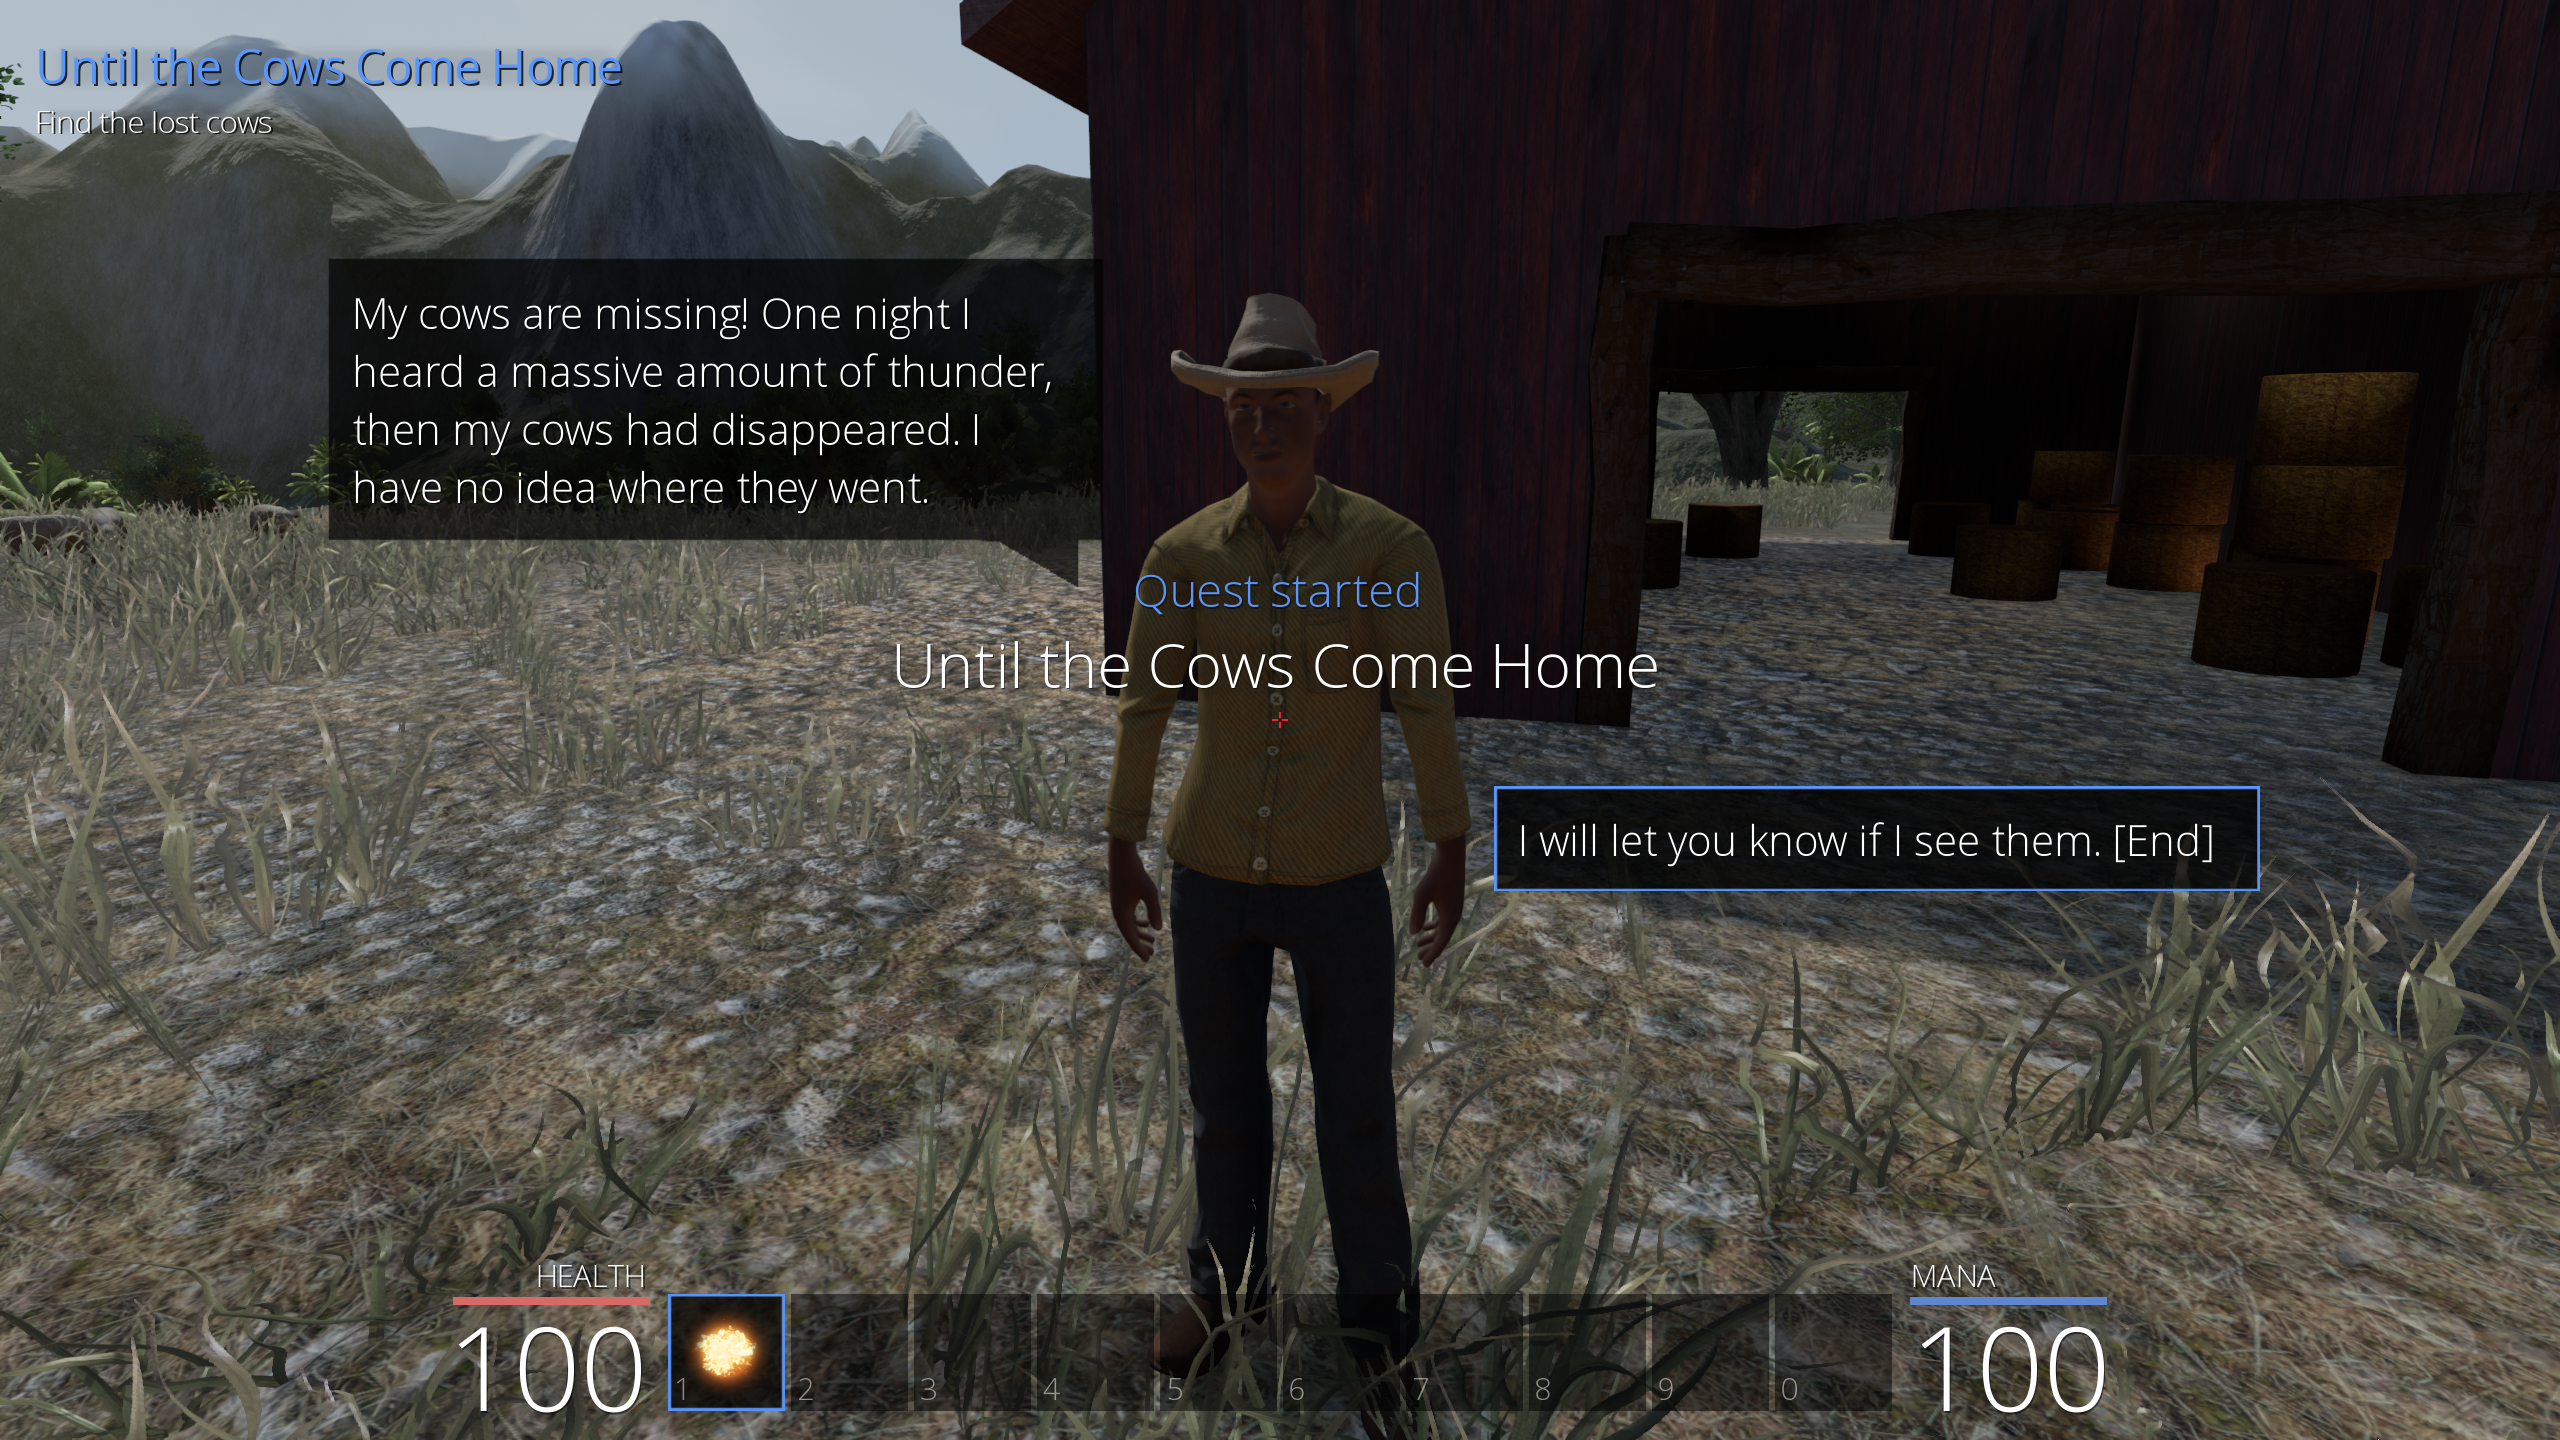 The missing cows quest